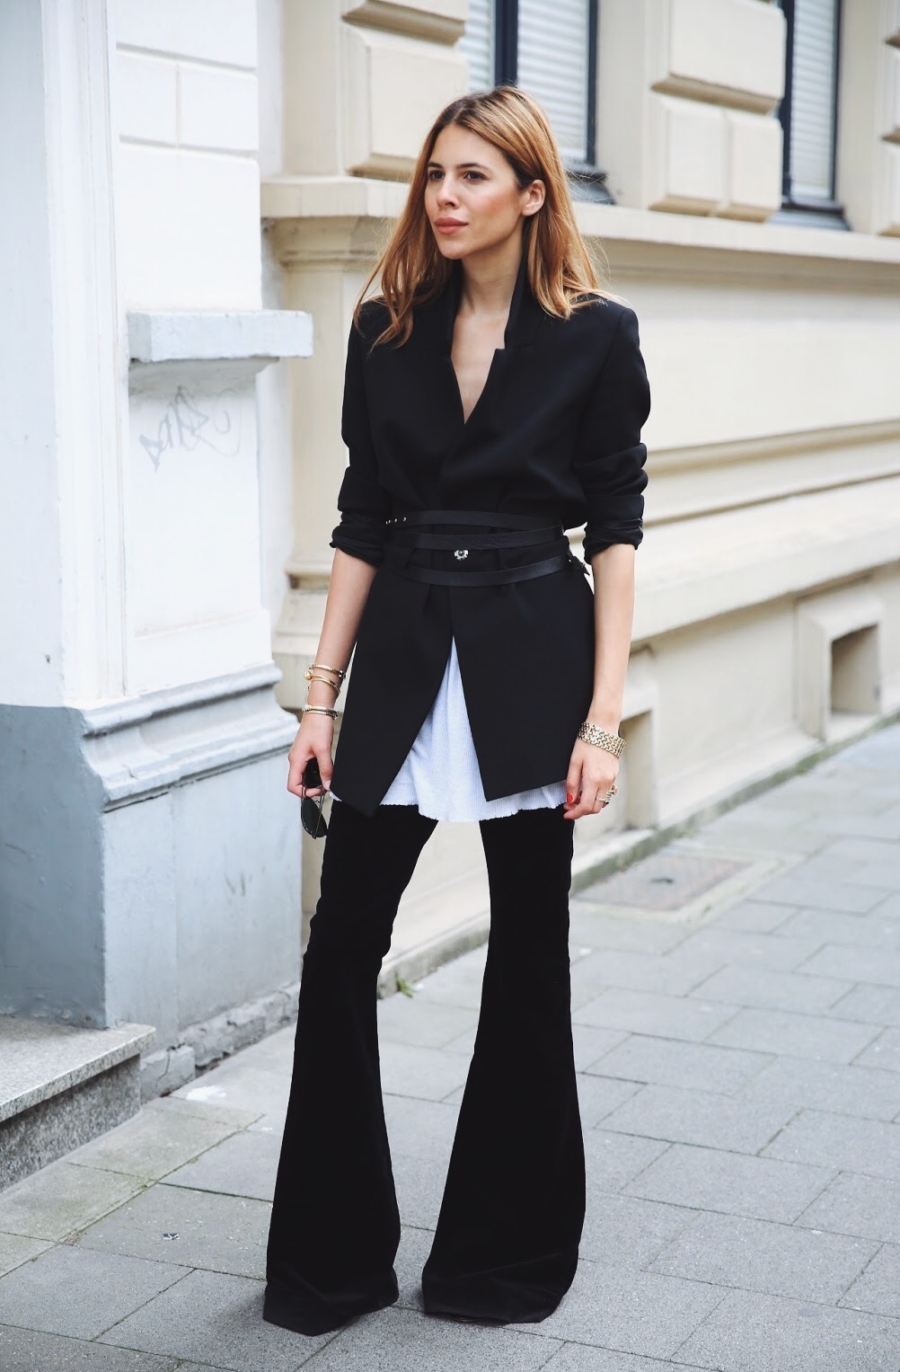 Structured Blazer - 7 Pieces to Spice Up Your Work Outfit // Notjessfashion.com